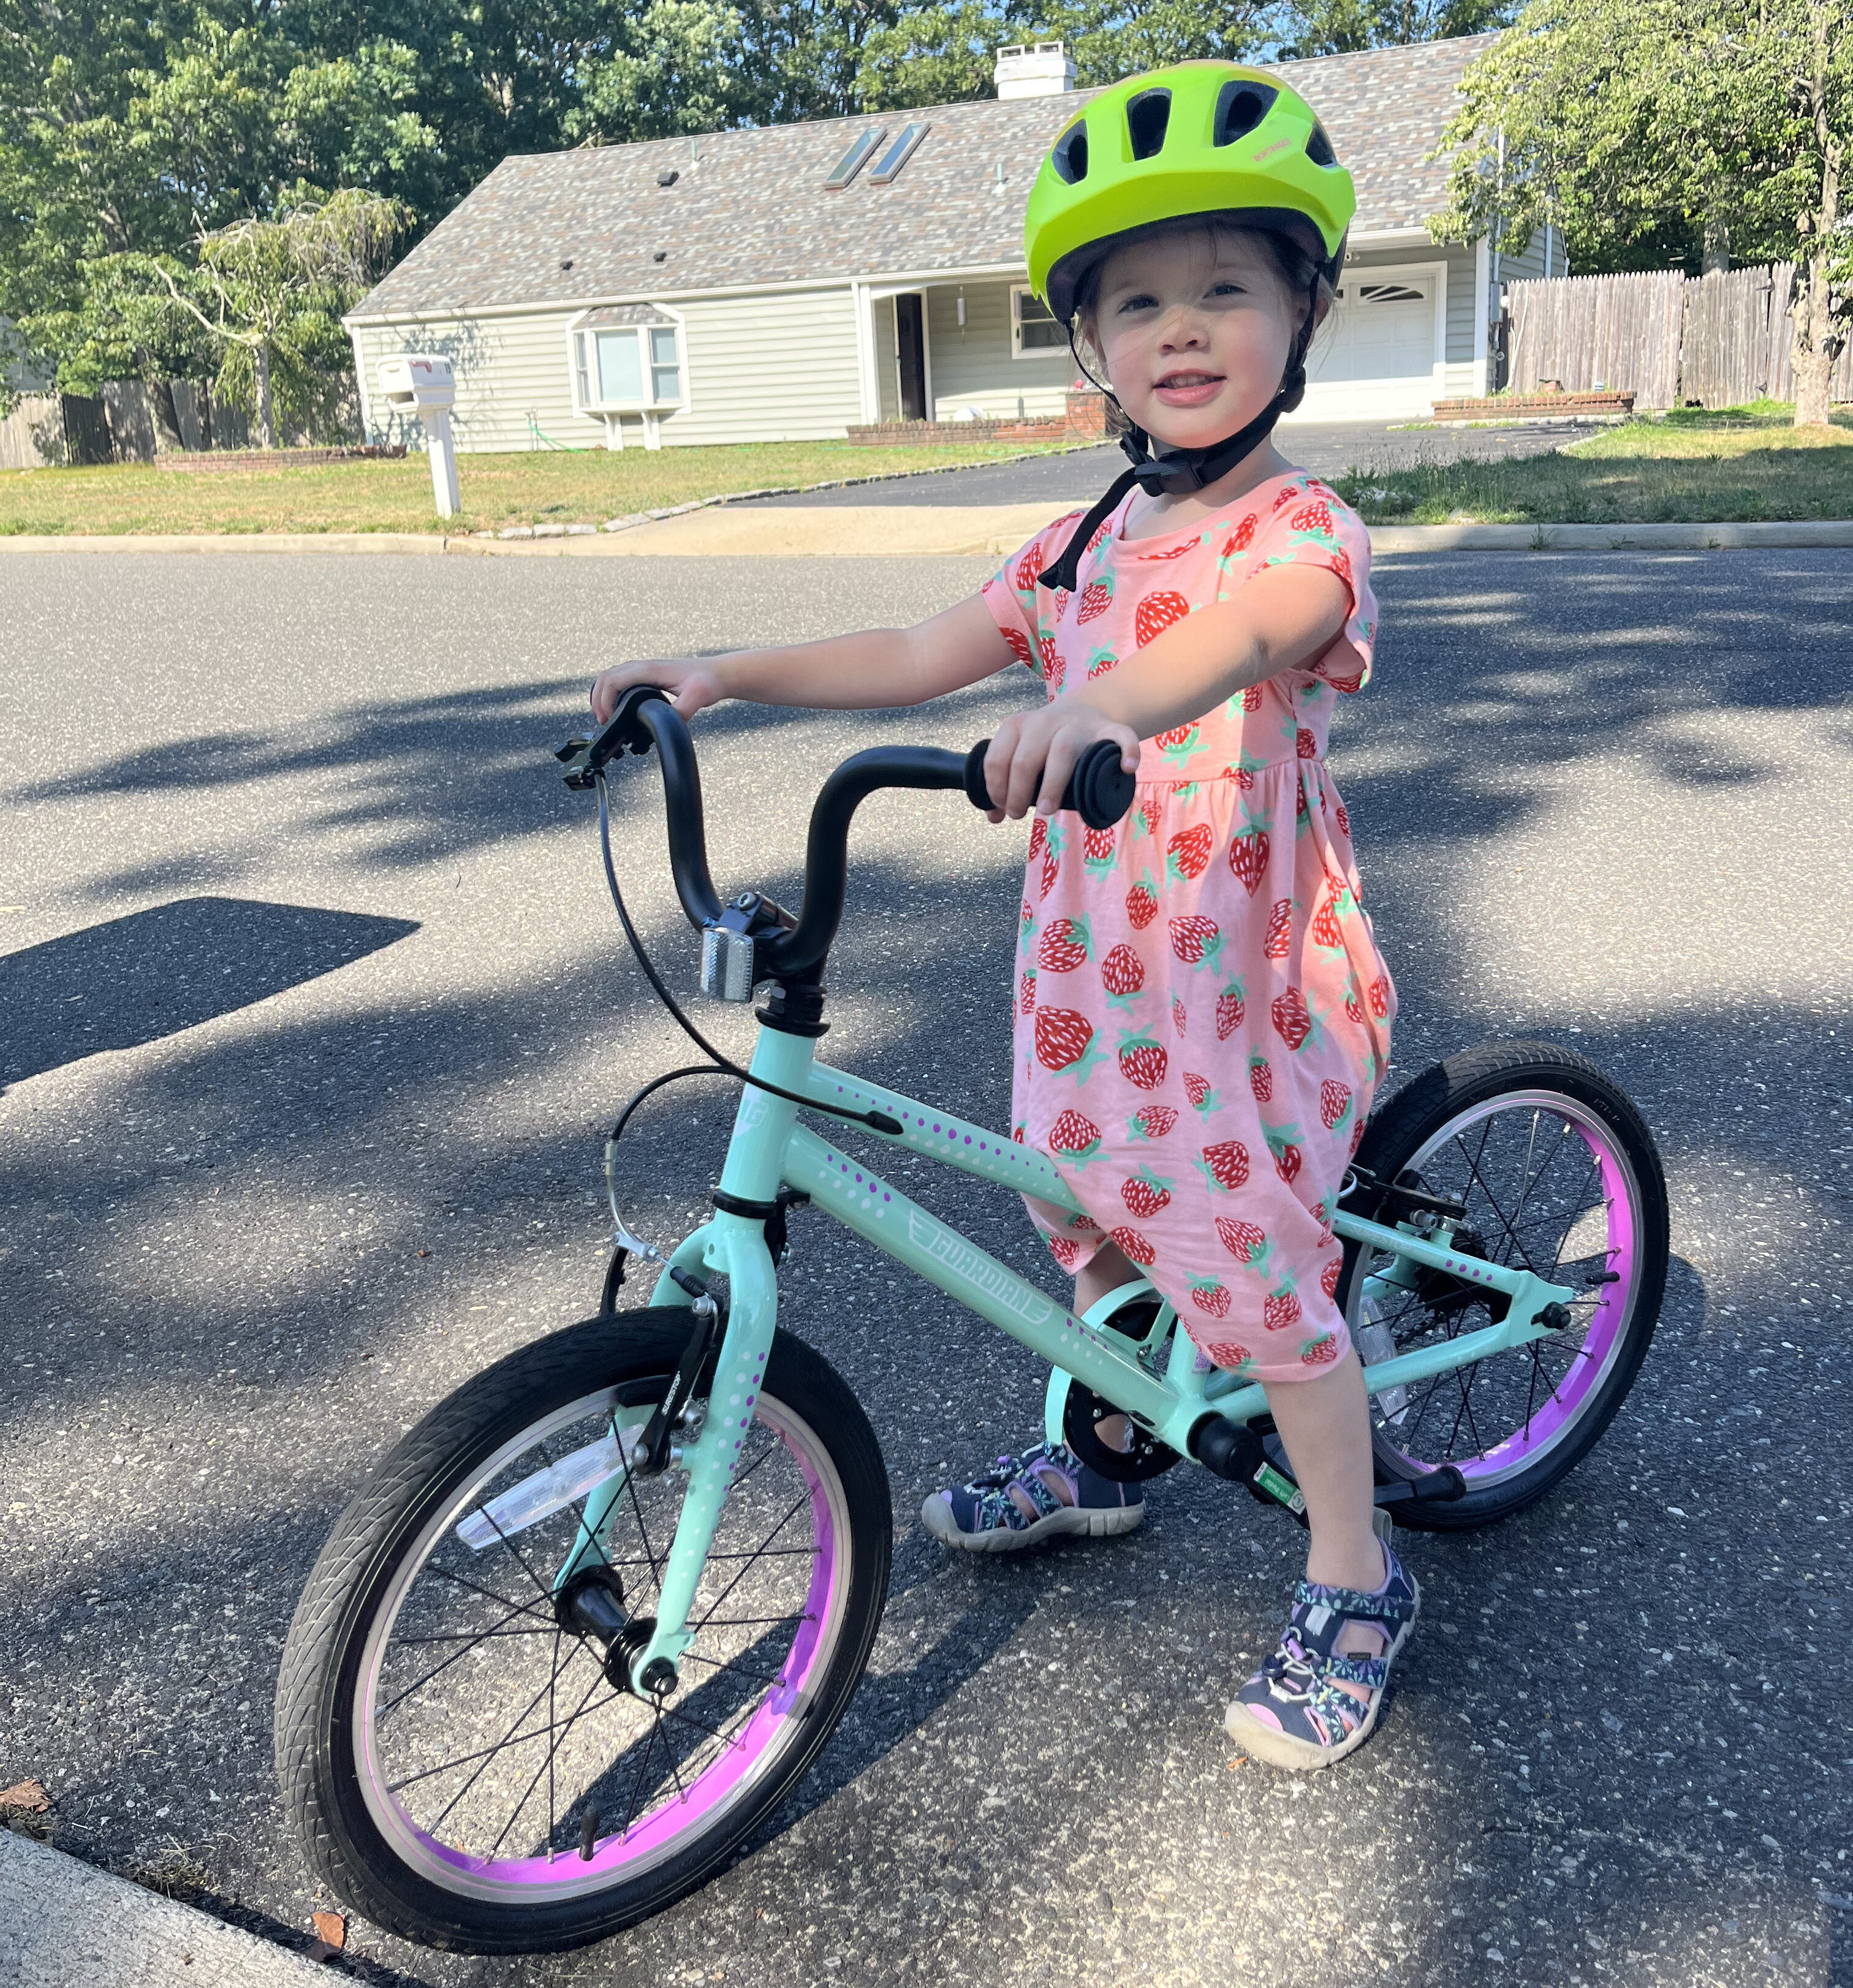 From Balance Bike to Pedals: My 4 Year Old Learned to Ride a Bike Without Training Wheels